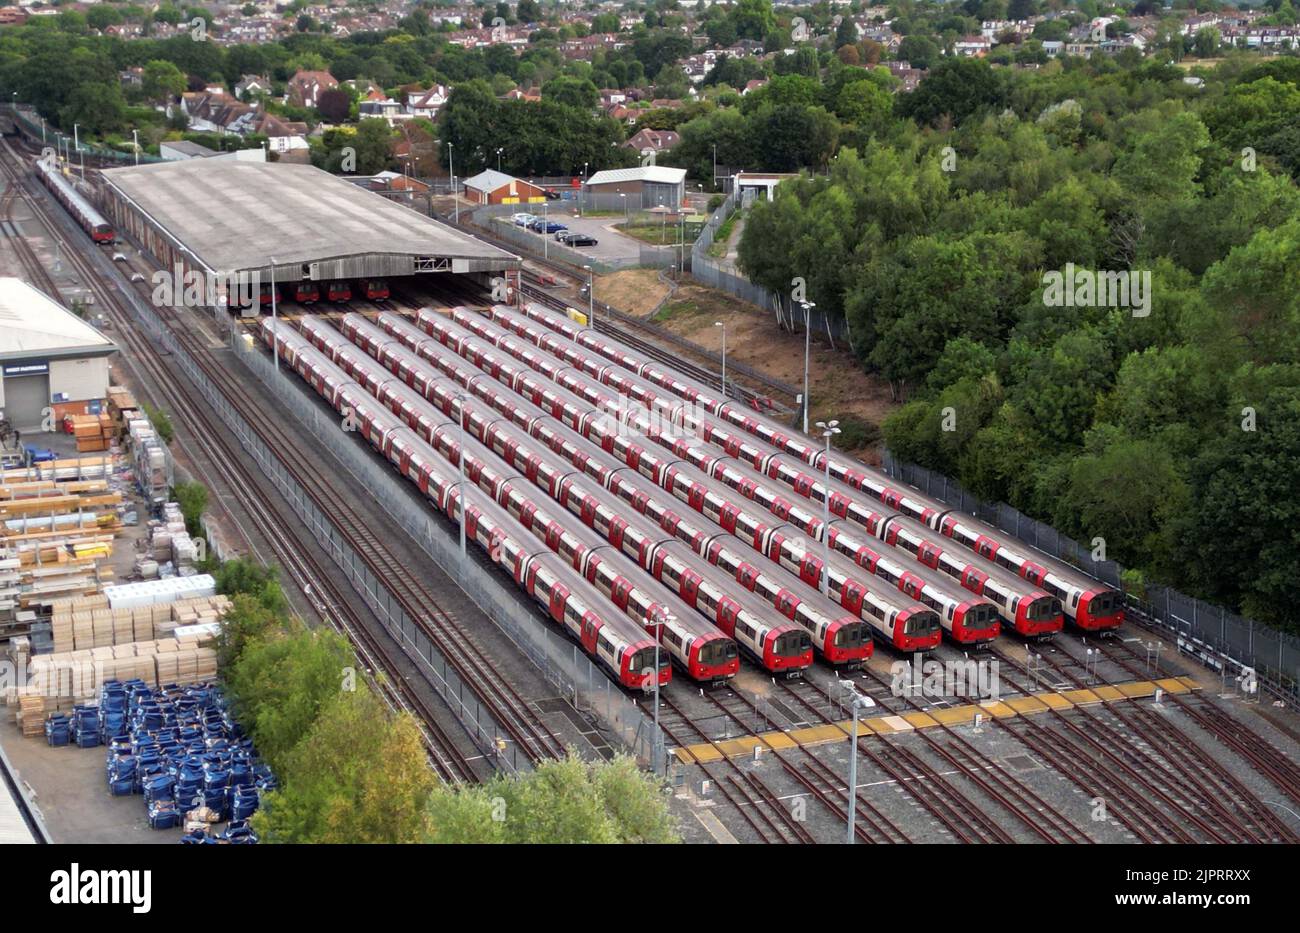 pic shows:  19.8.22 Shed for tube trains between East Finchley and Highgate stations Is full with unused trains as  Tube strike meant most lines were Stock Photo